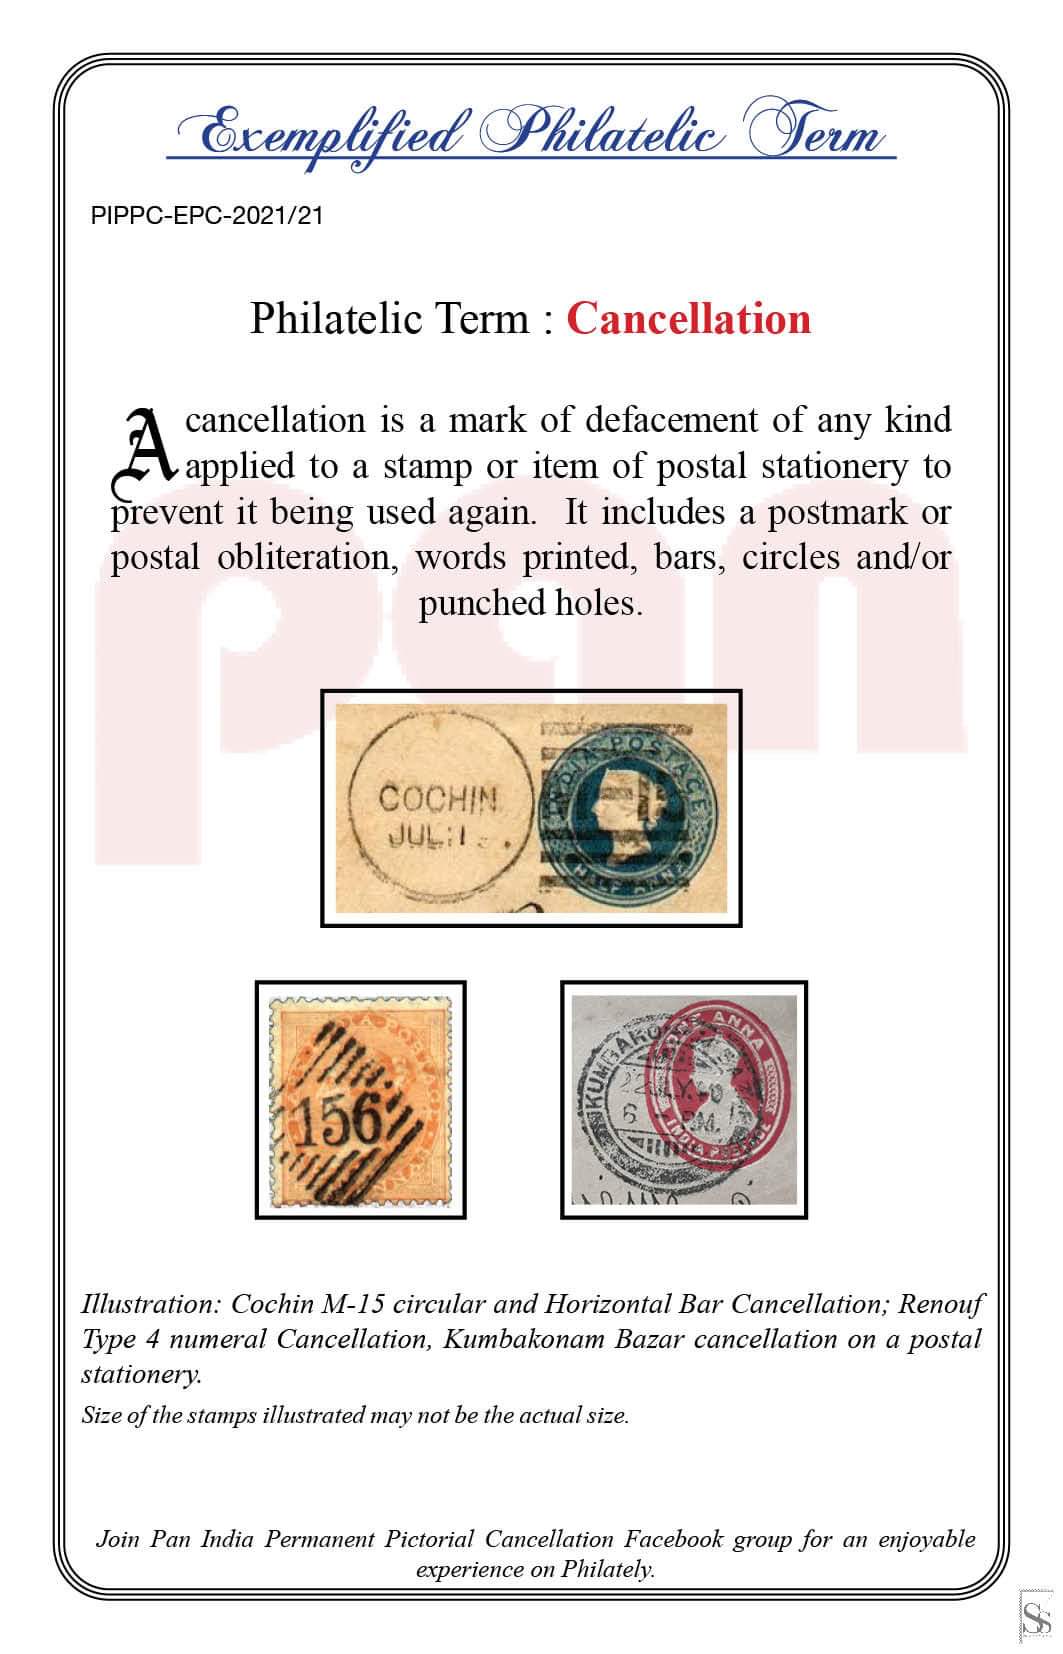 21. Today's Exemplified Philatelic term-Cancellation